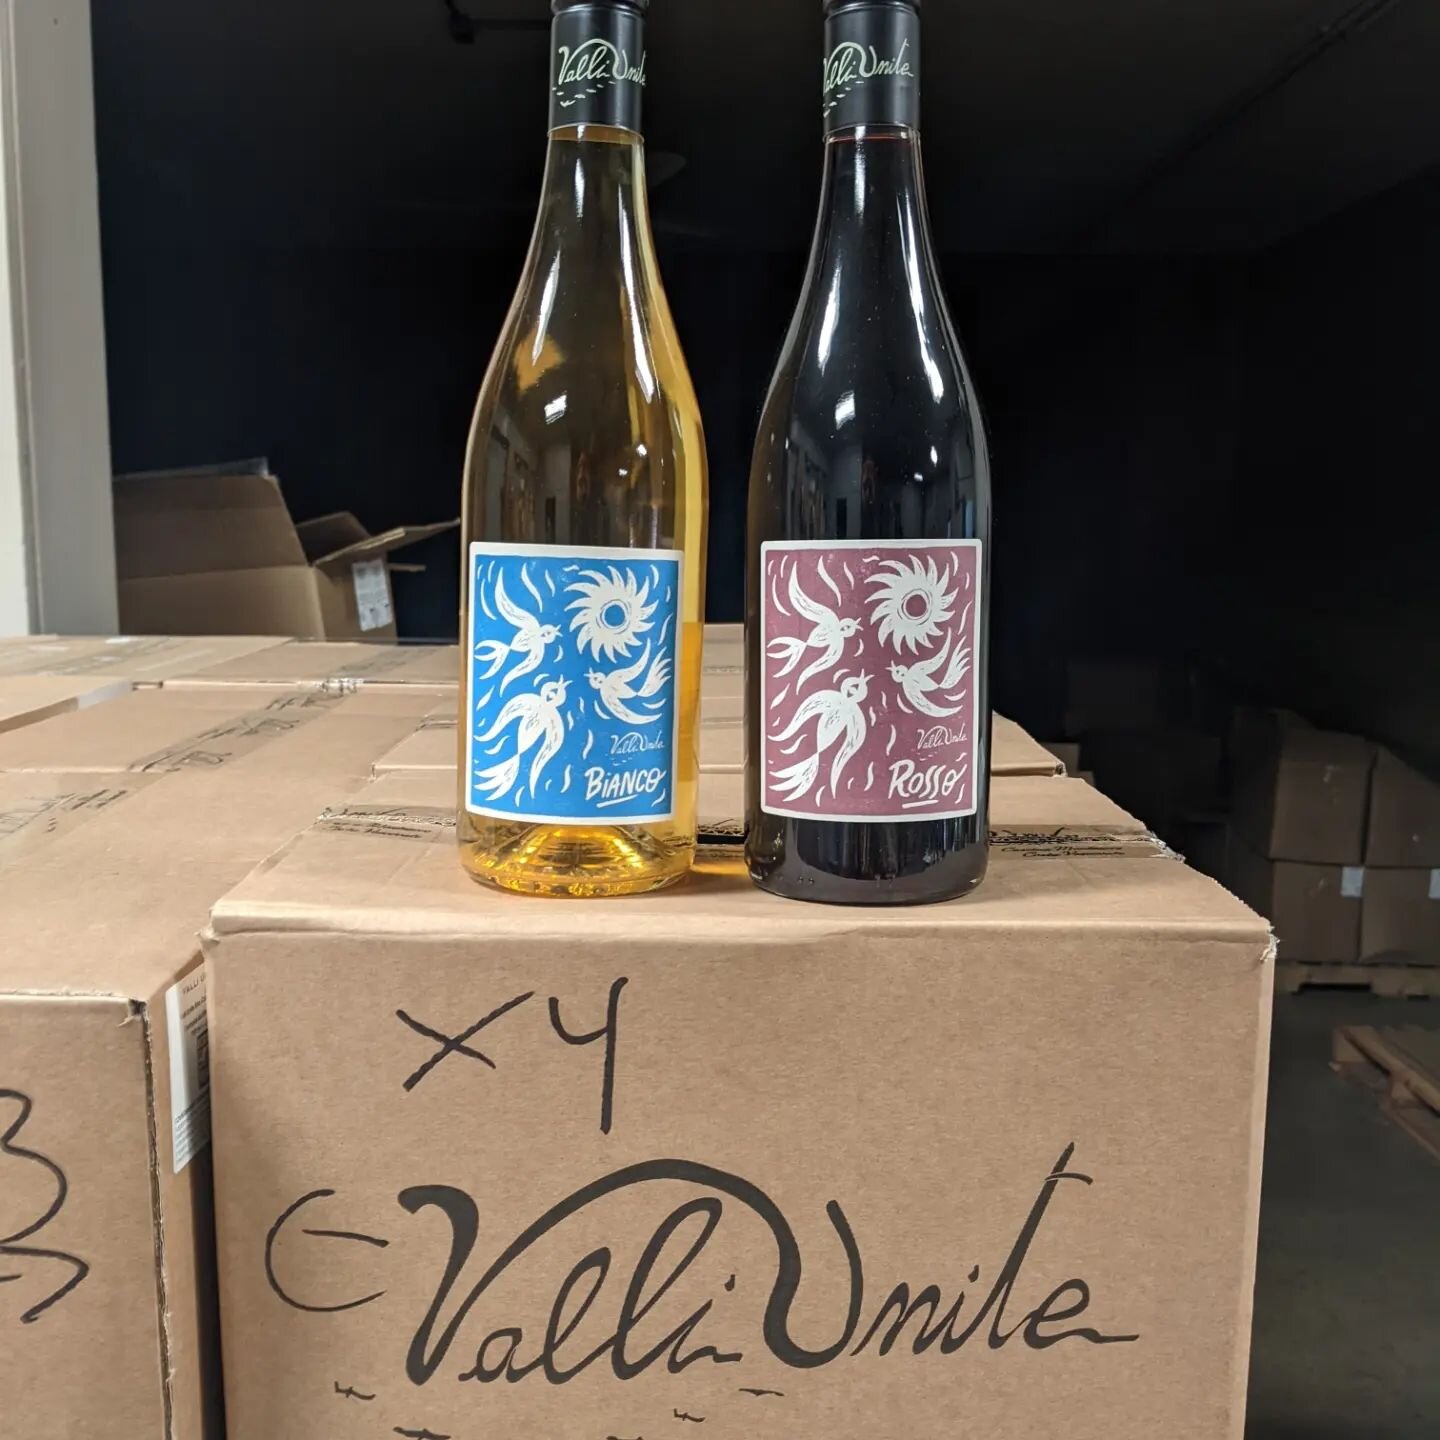 Recycling story pics into a permanent post about recent arrivals from @vinotasselections and @portovino_imports ! Excited to get these out into the market! #naturalwineforiowa #onlythegoodstuff